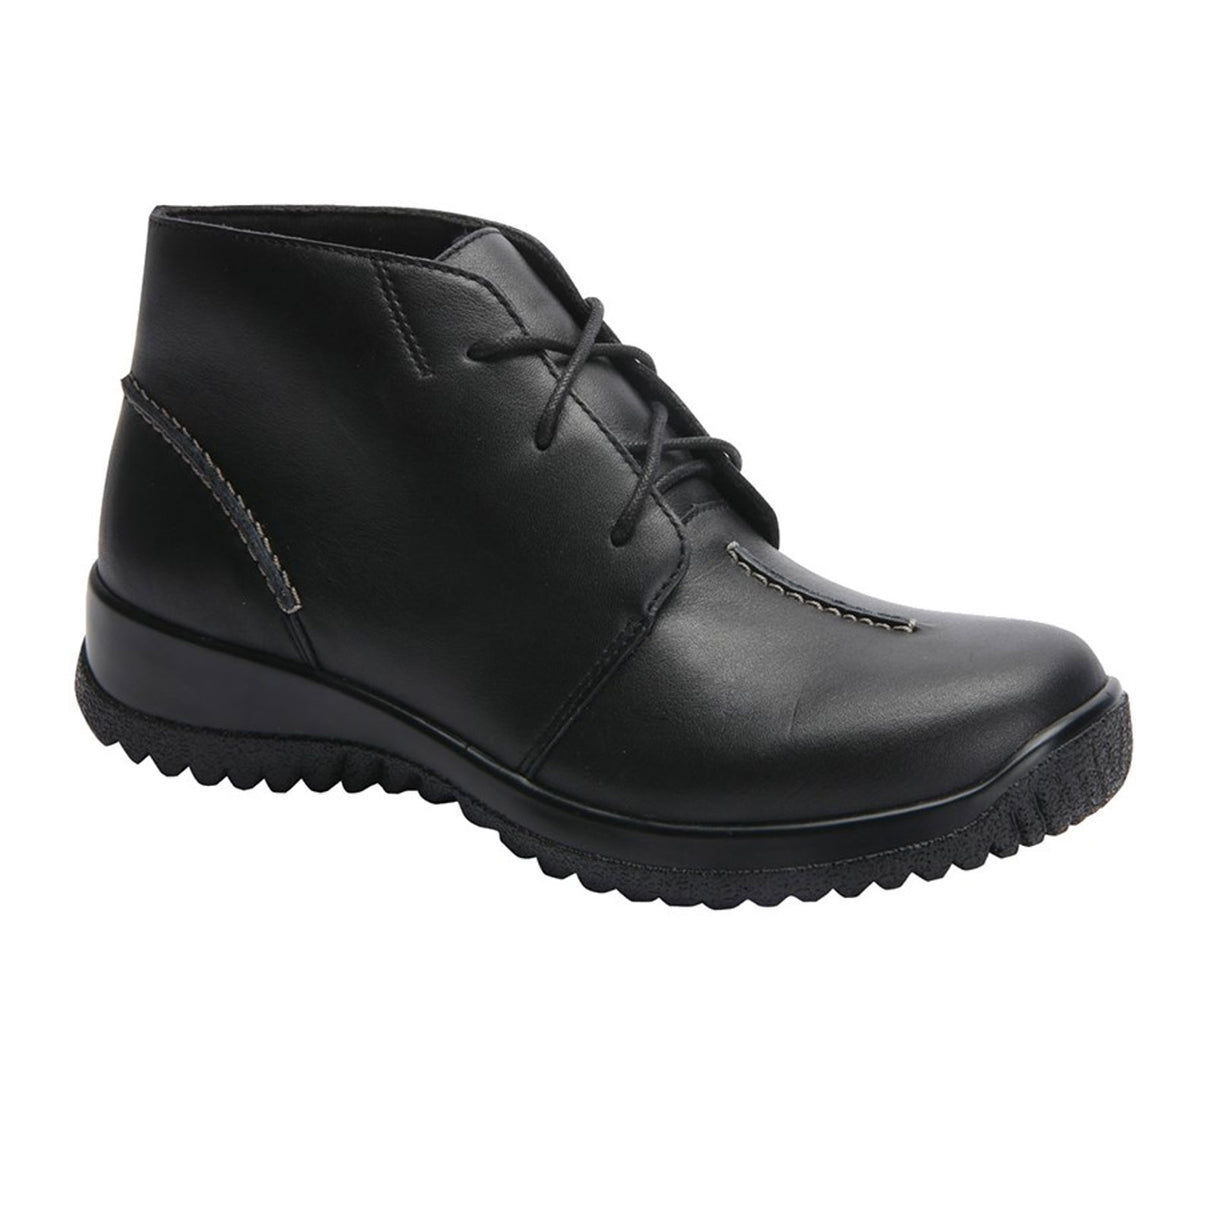 Drew Krista Boot (Women) - Black Leather Boots - Fashion - Ankle Boot - The Heel Shoe Fitters